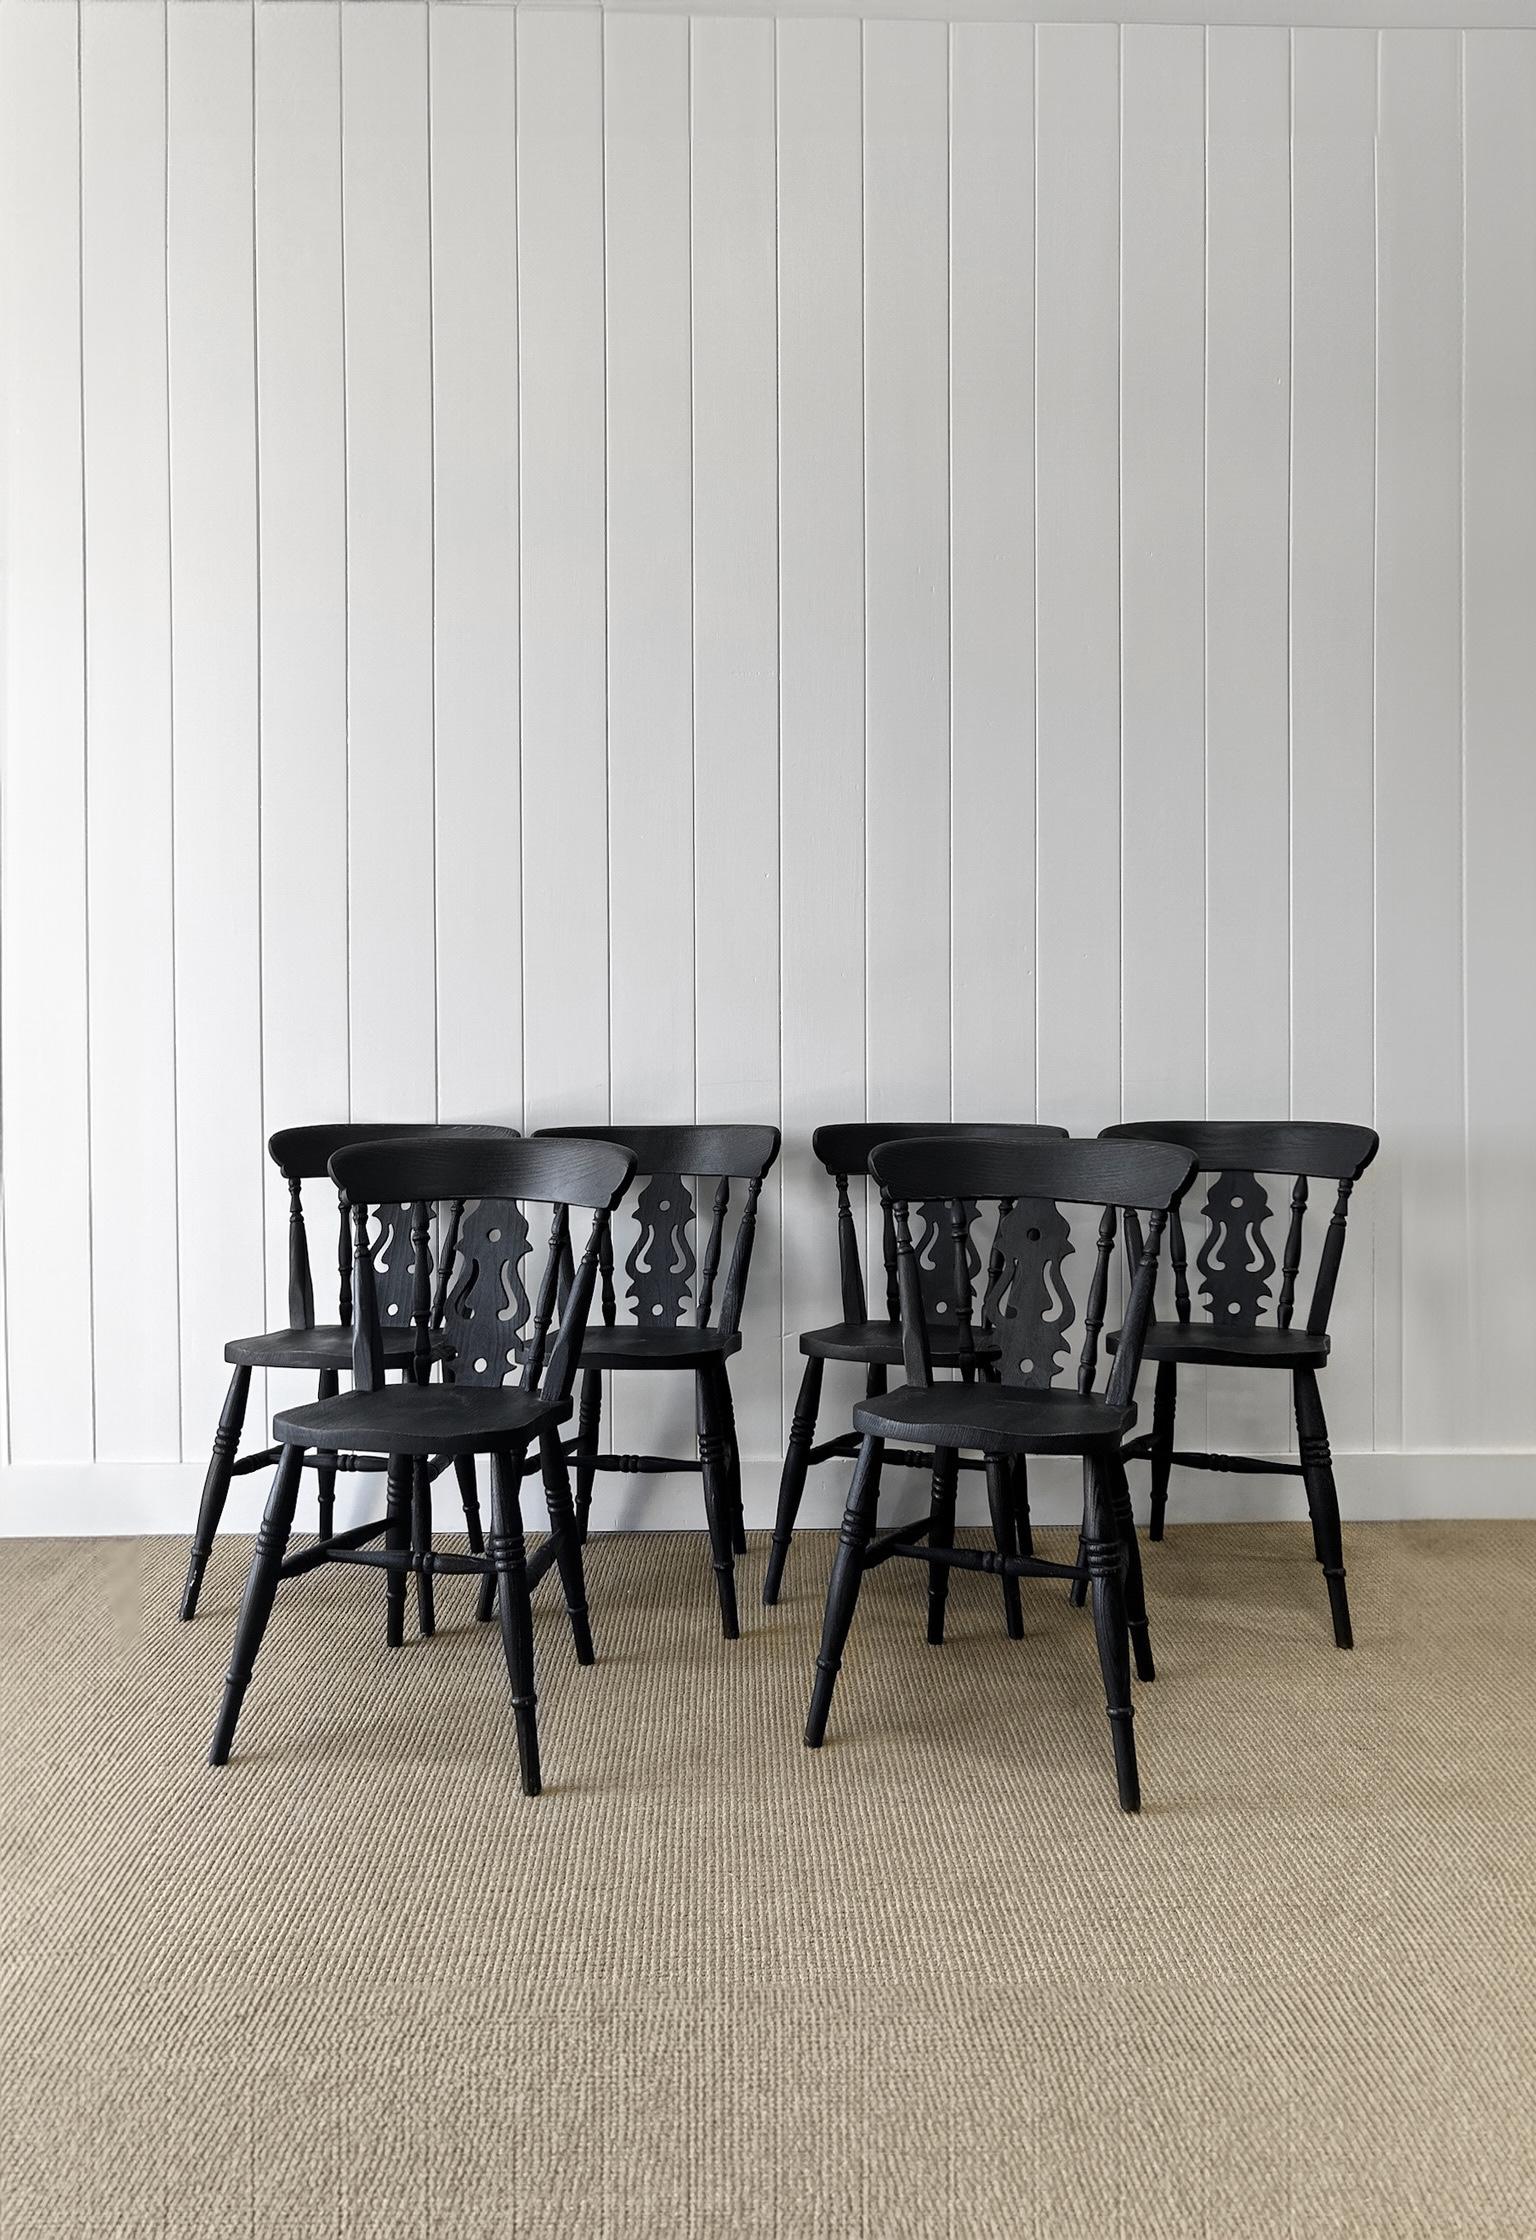 Victorian A Vintage Set of 6 Fiddleback Chairs Painted Black For Sale